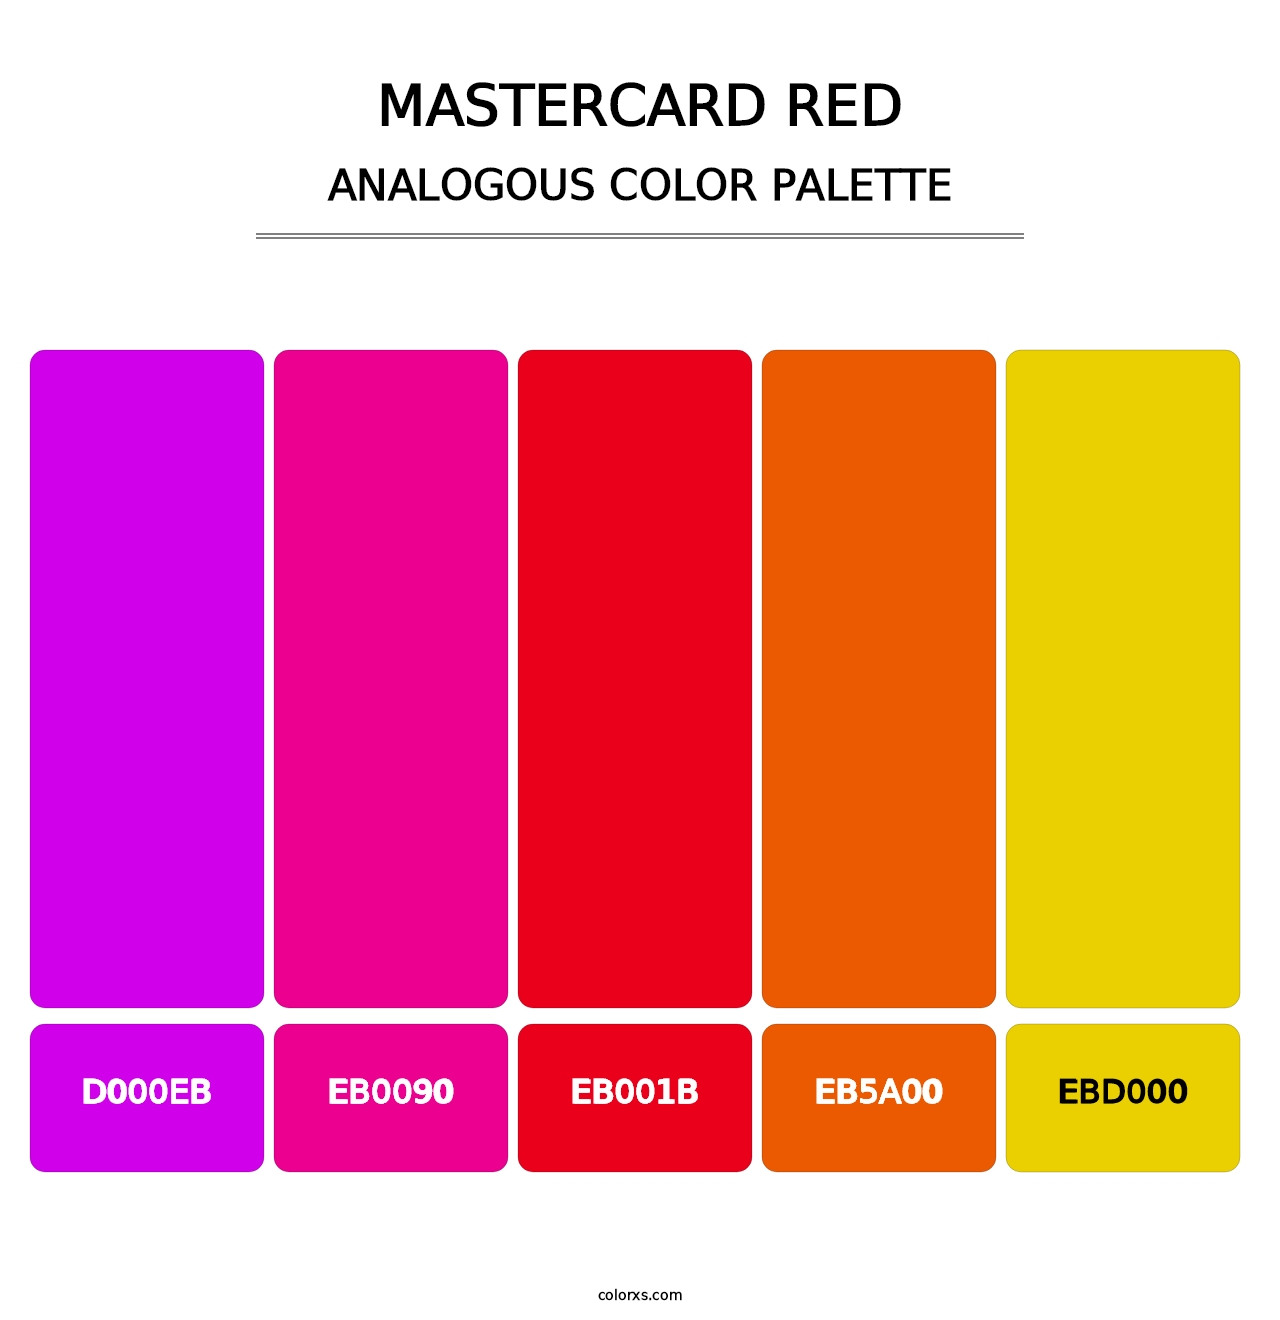 Mastercard Red - Analogous Color Palette